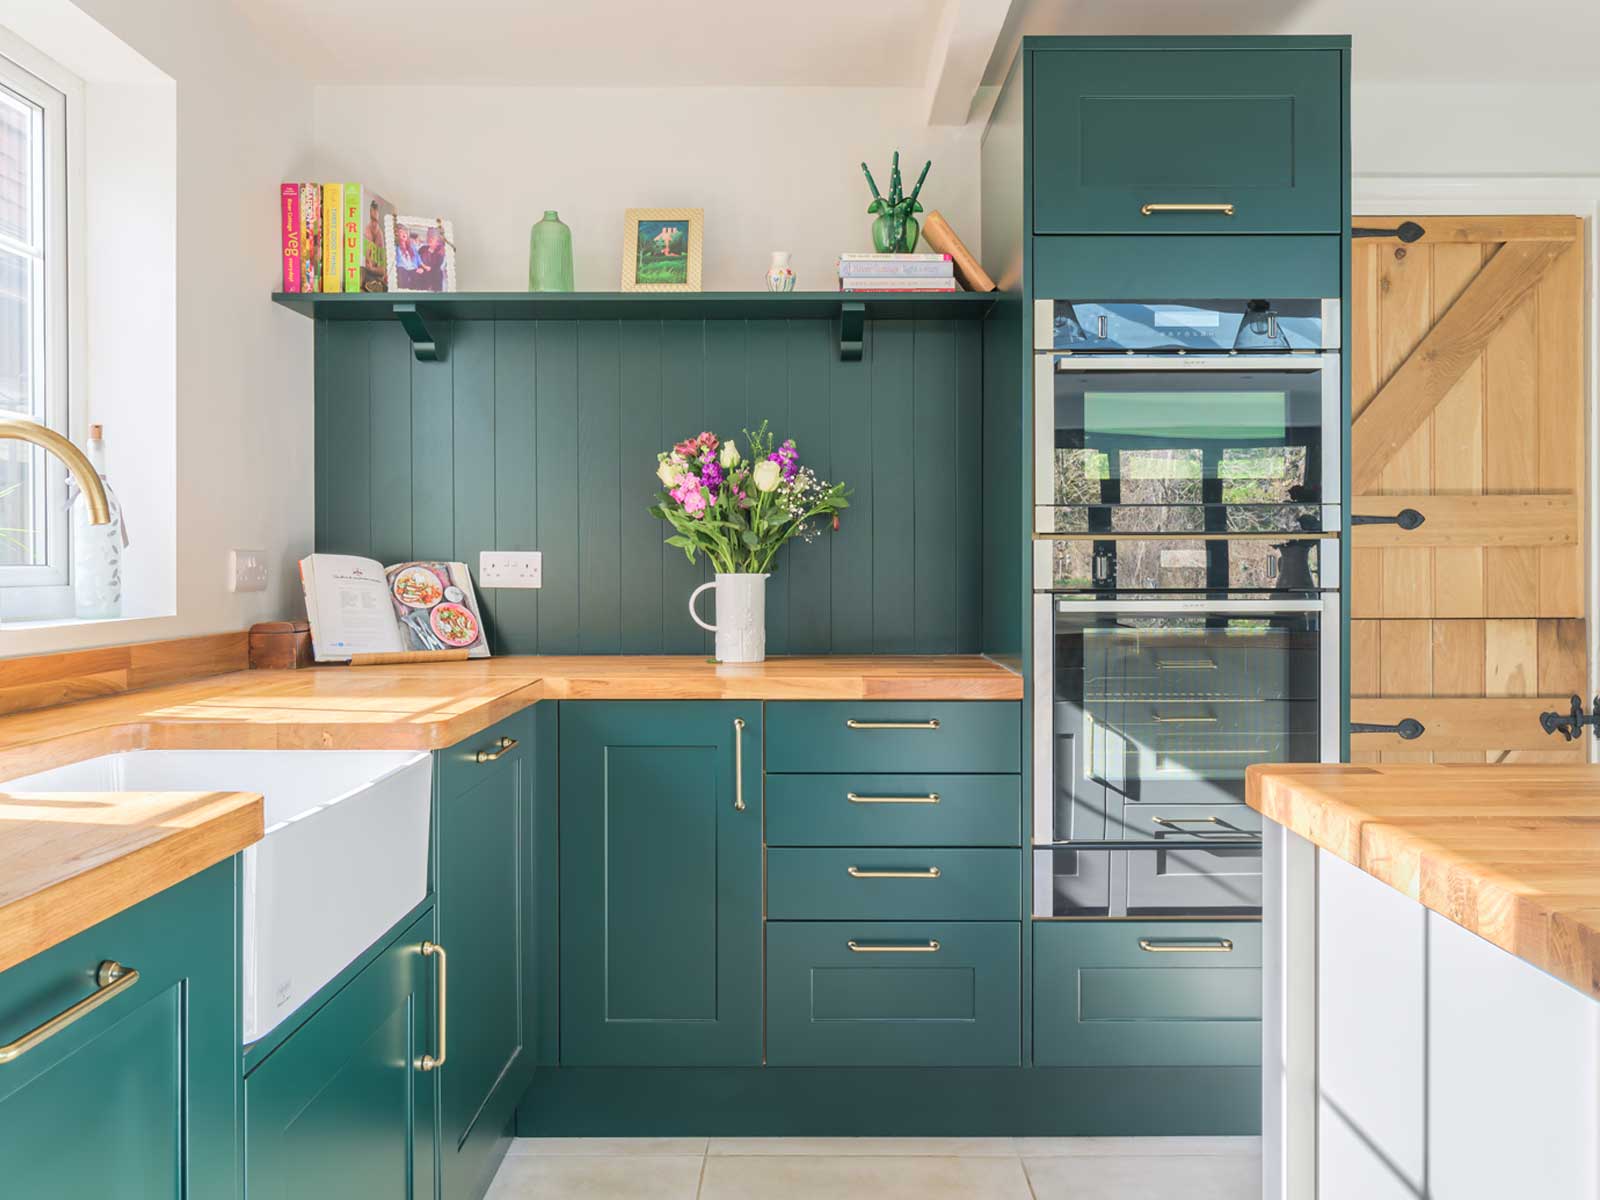 A kitschy kitchen with eclectic kitchen decor and green kitchen paint